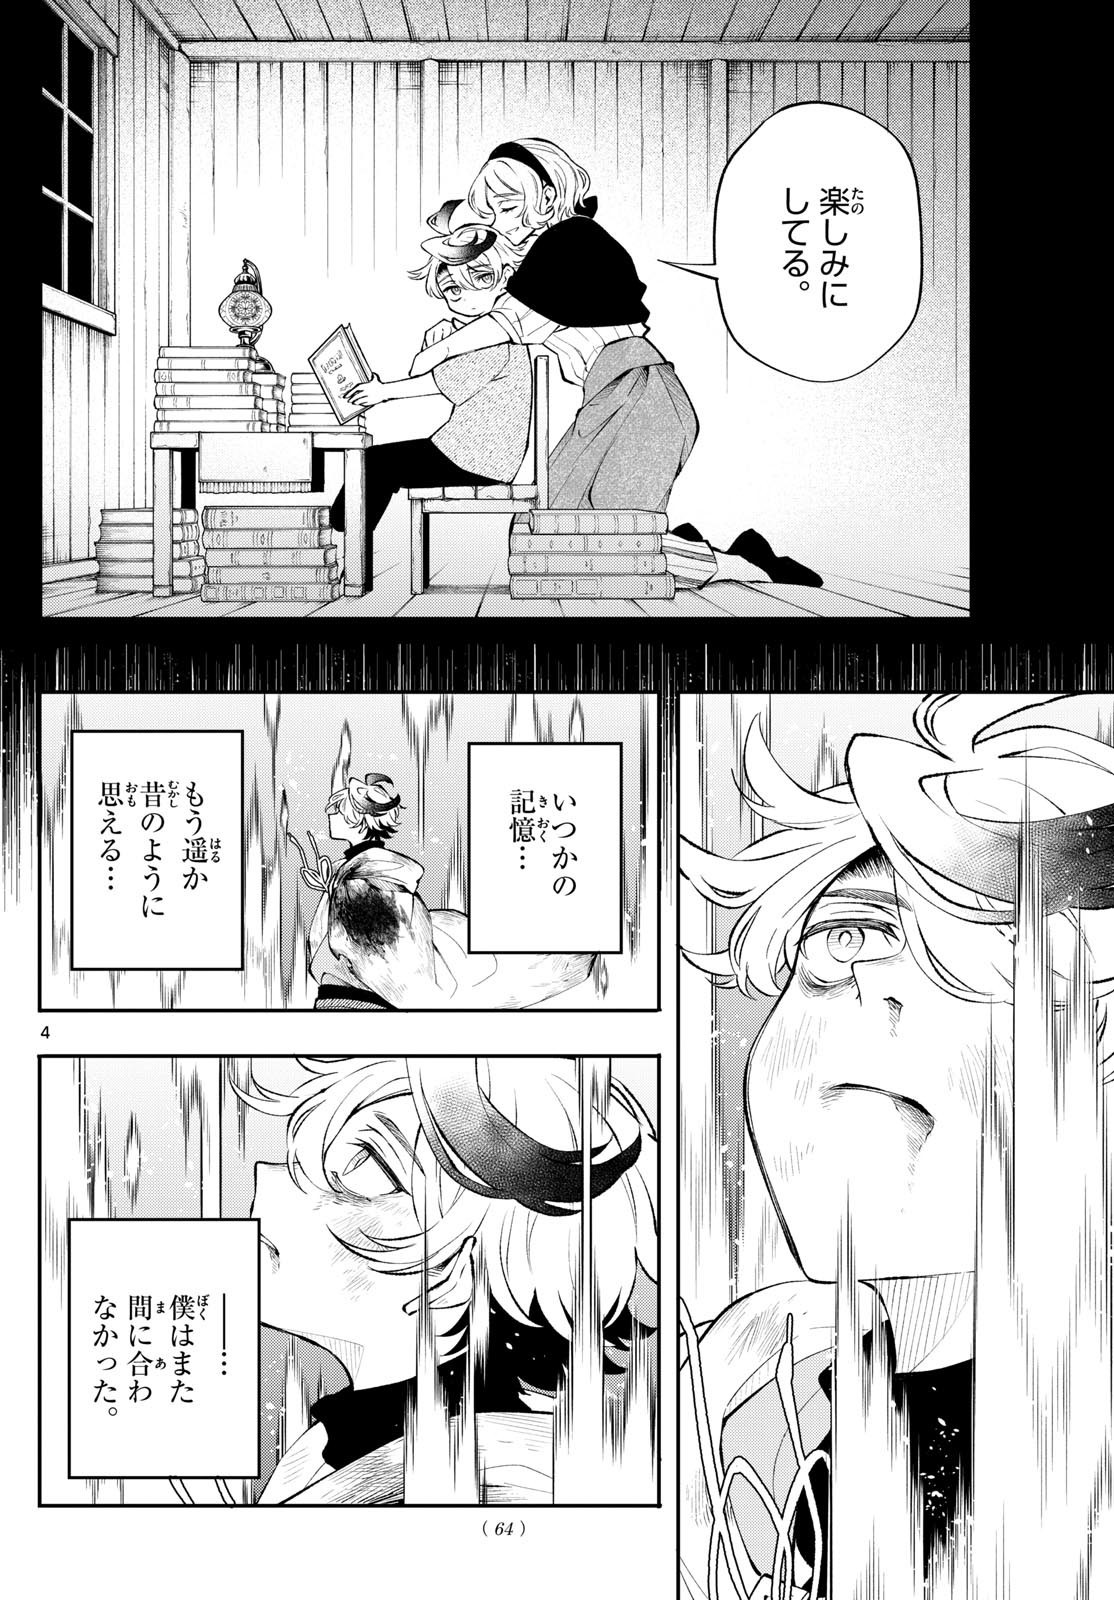 Kaiten no Albus - Chapter 9 - Page 4